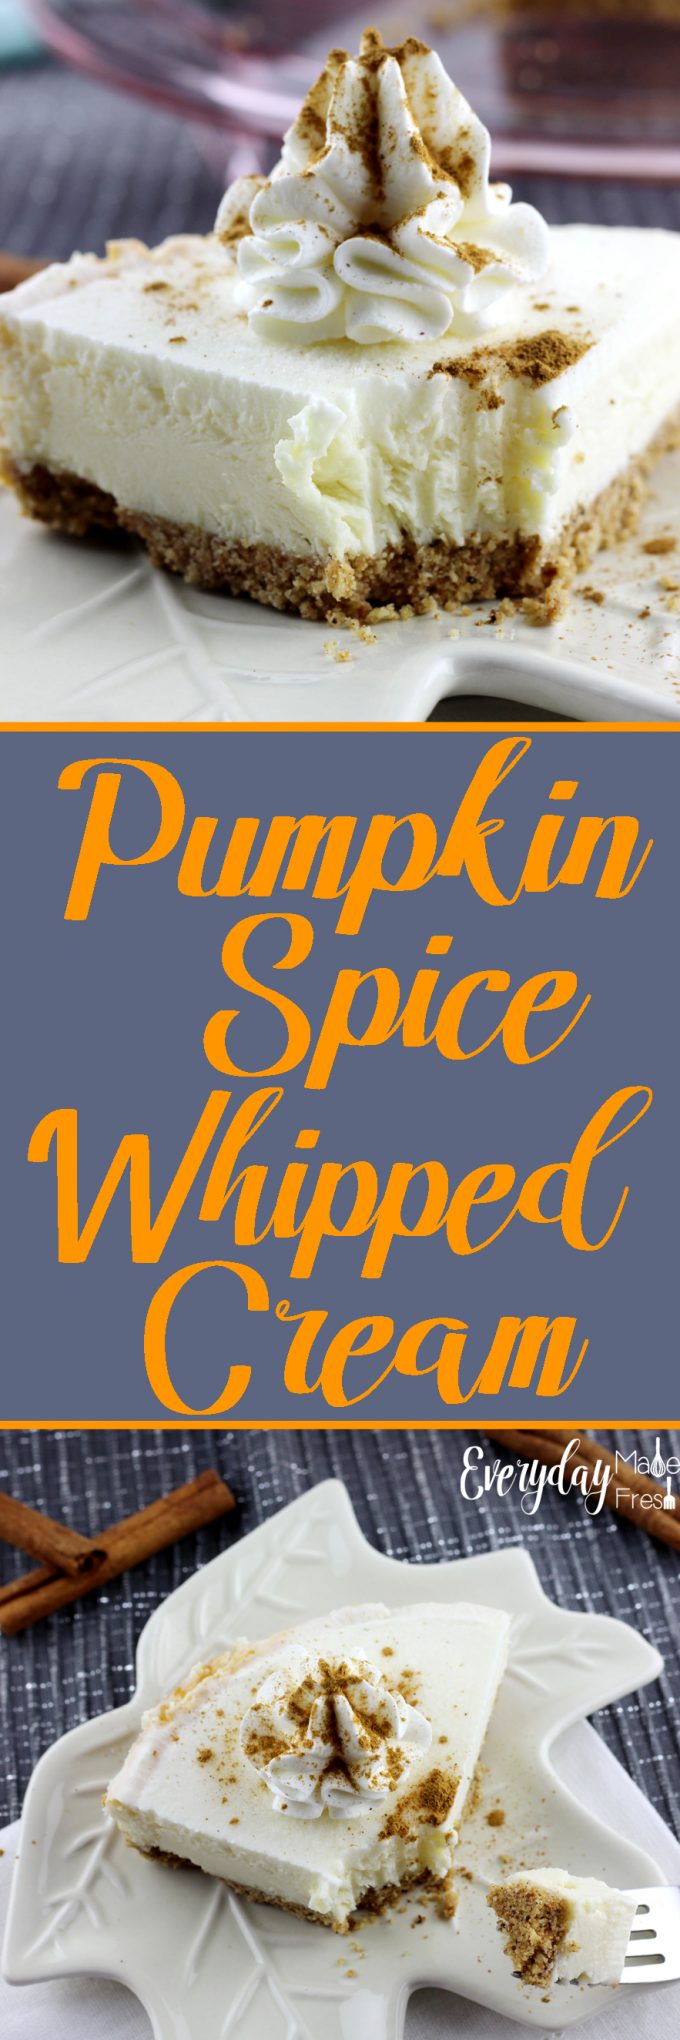 Pumpkin Spice Whipped Cream is a perfect addition to a Sara Lee® Frozen Dessert. It gives a great semi-homemade touch that makes even informal gatherings extra special. | EverydayMadeFresh.com 